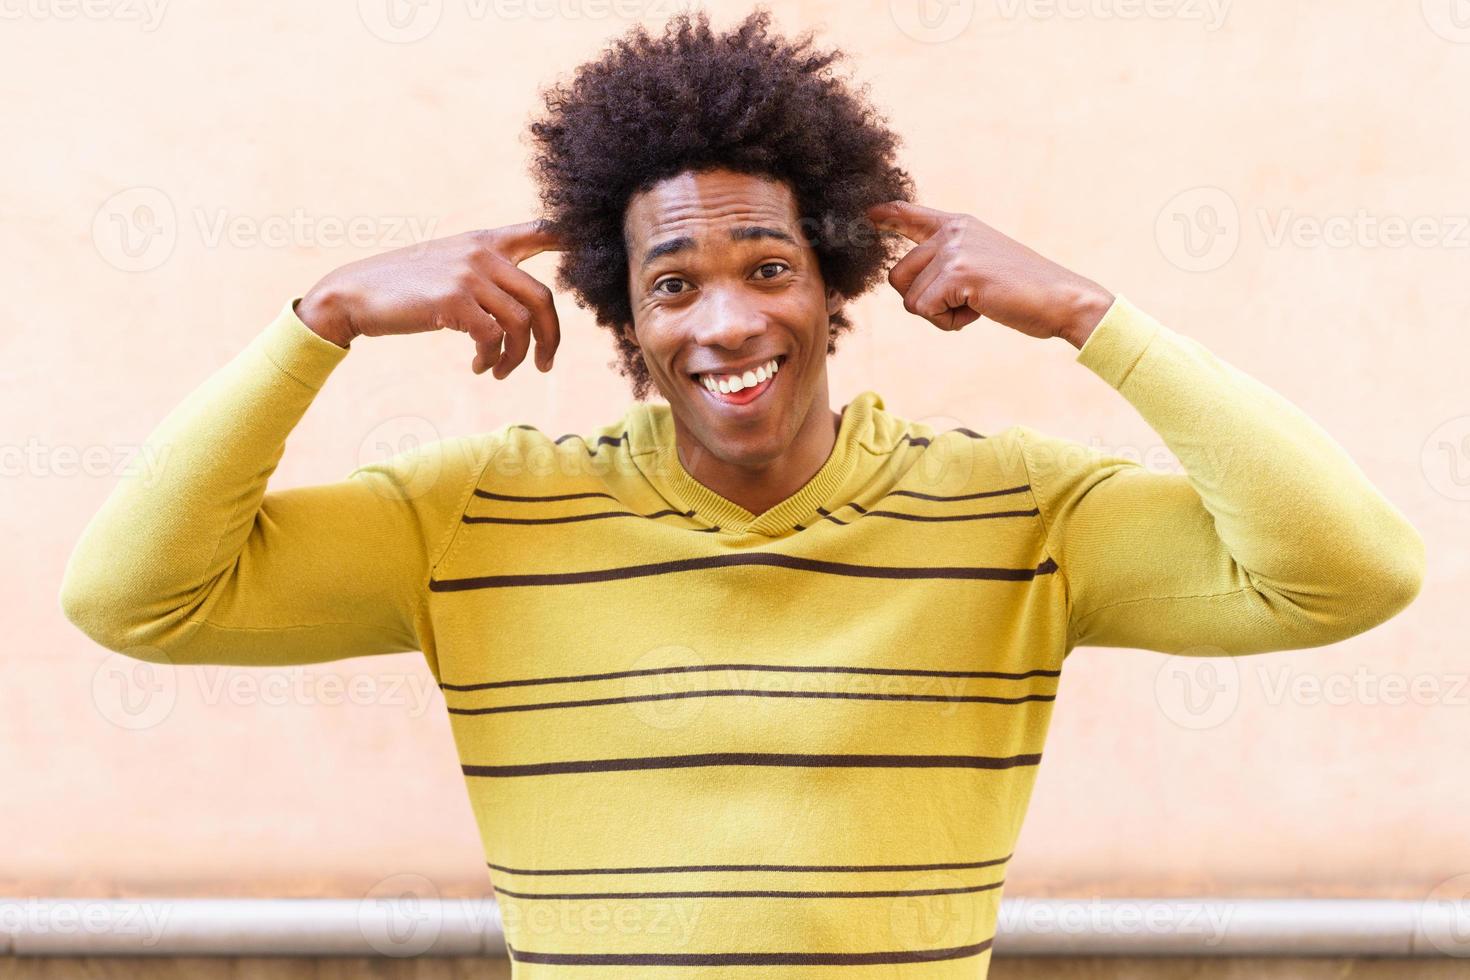 Black man with afro hair putting a crazy expression photo